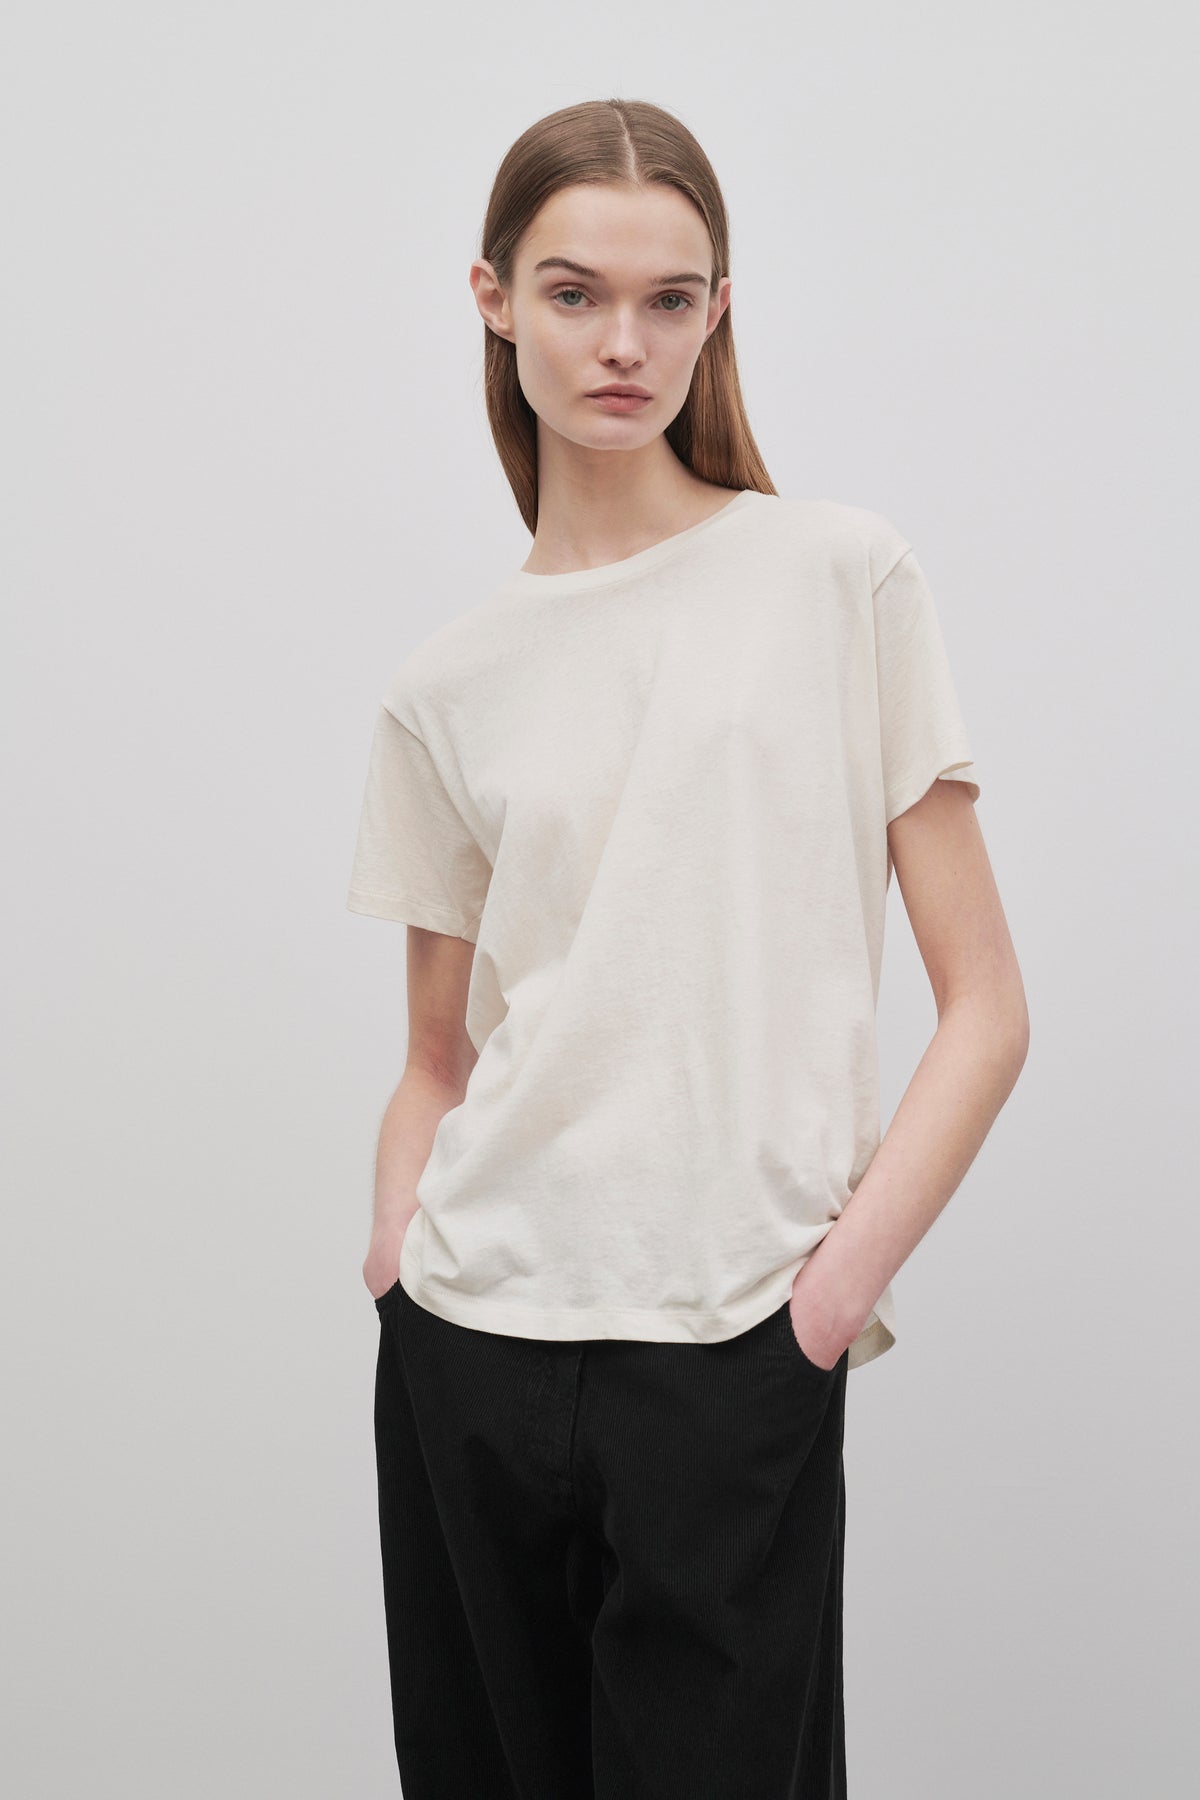 Fayola Top in Cotton and Cashmere